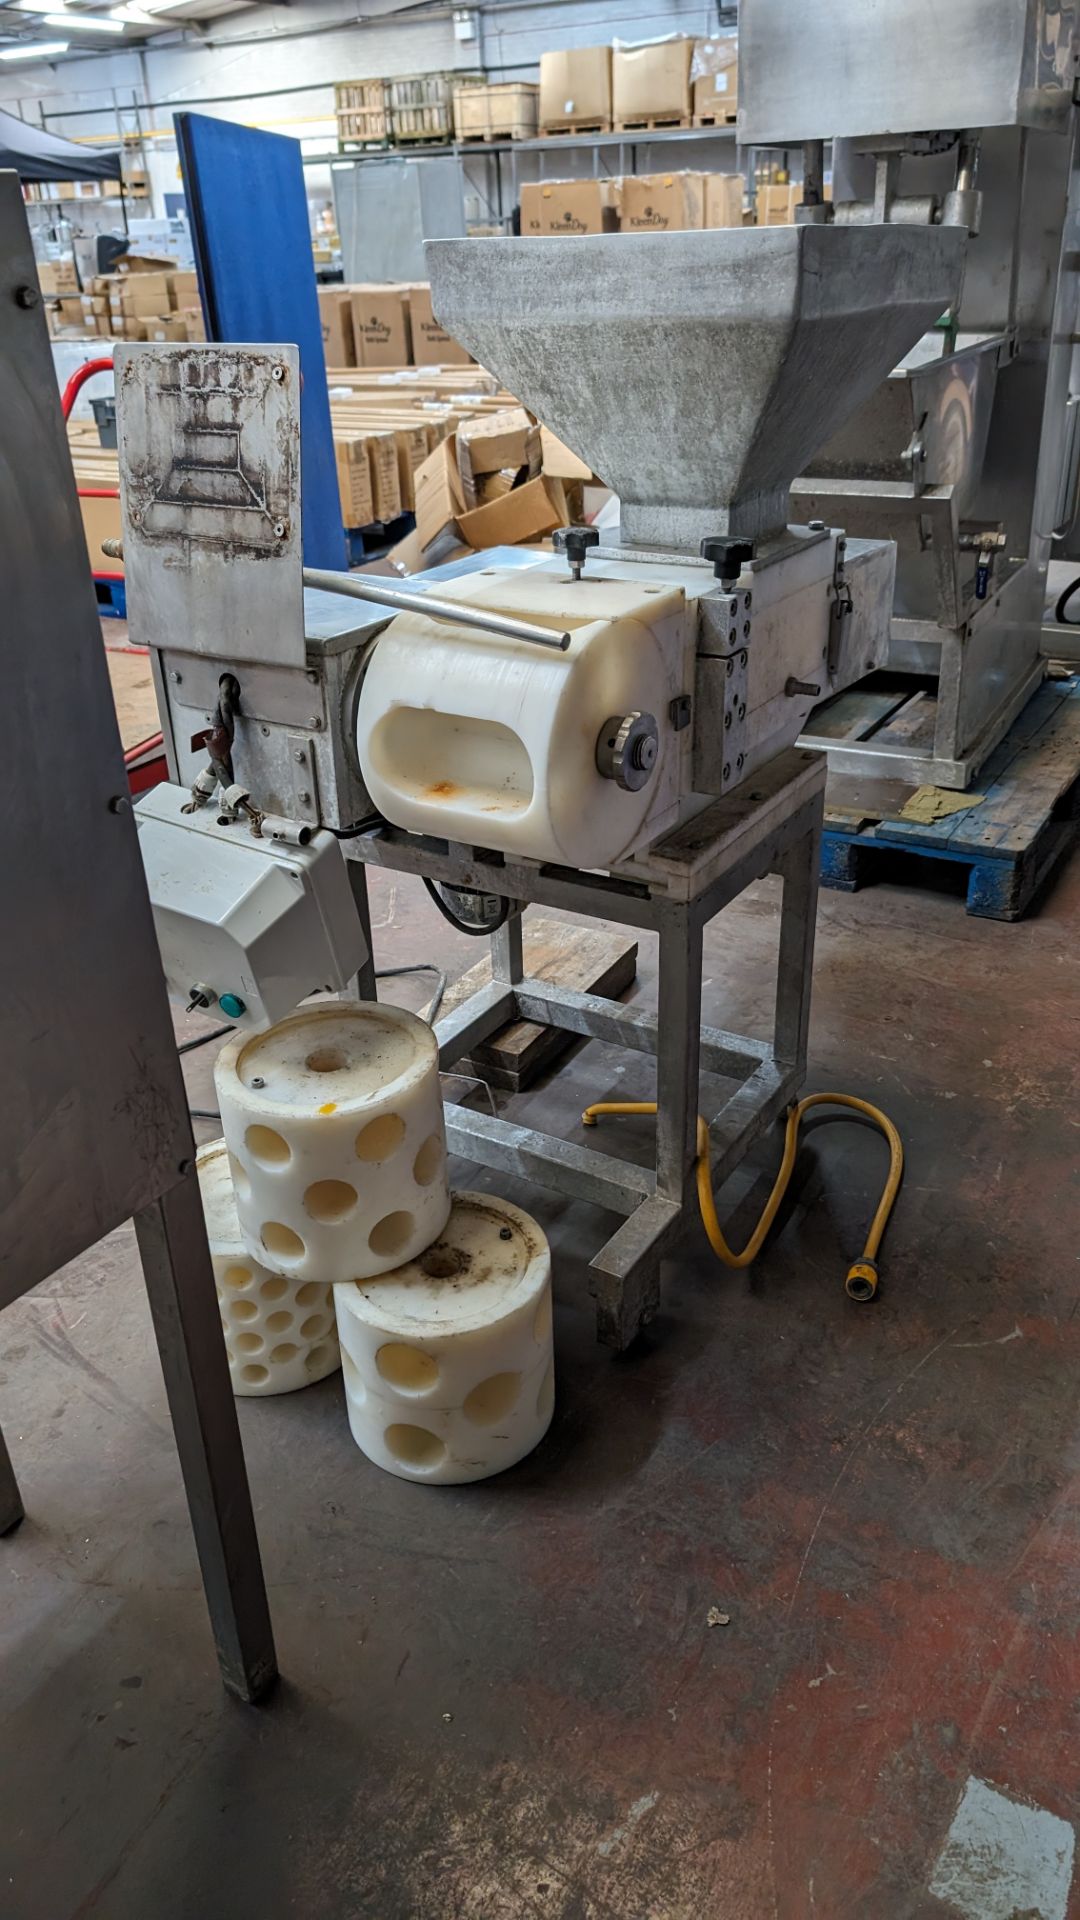 Mozzarella forming machine, 80kg/h, 3-phase, with 25g, 125g, 250g and 1kg forming rollers/moulds. U - Image 11 of 13